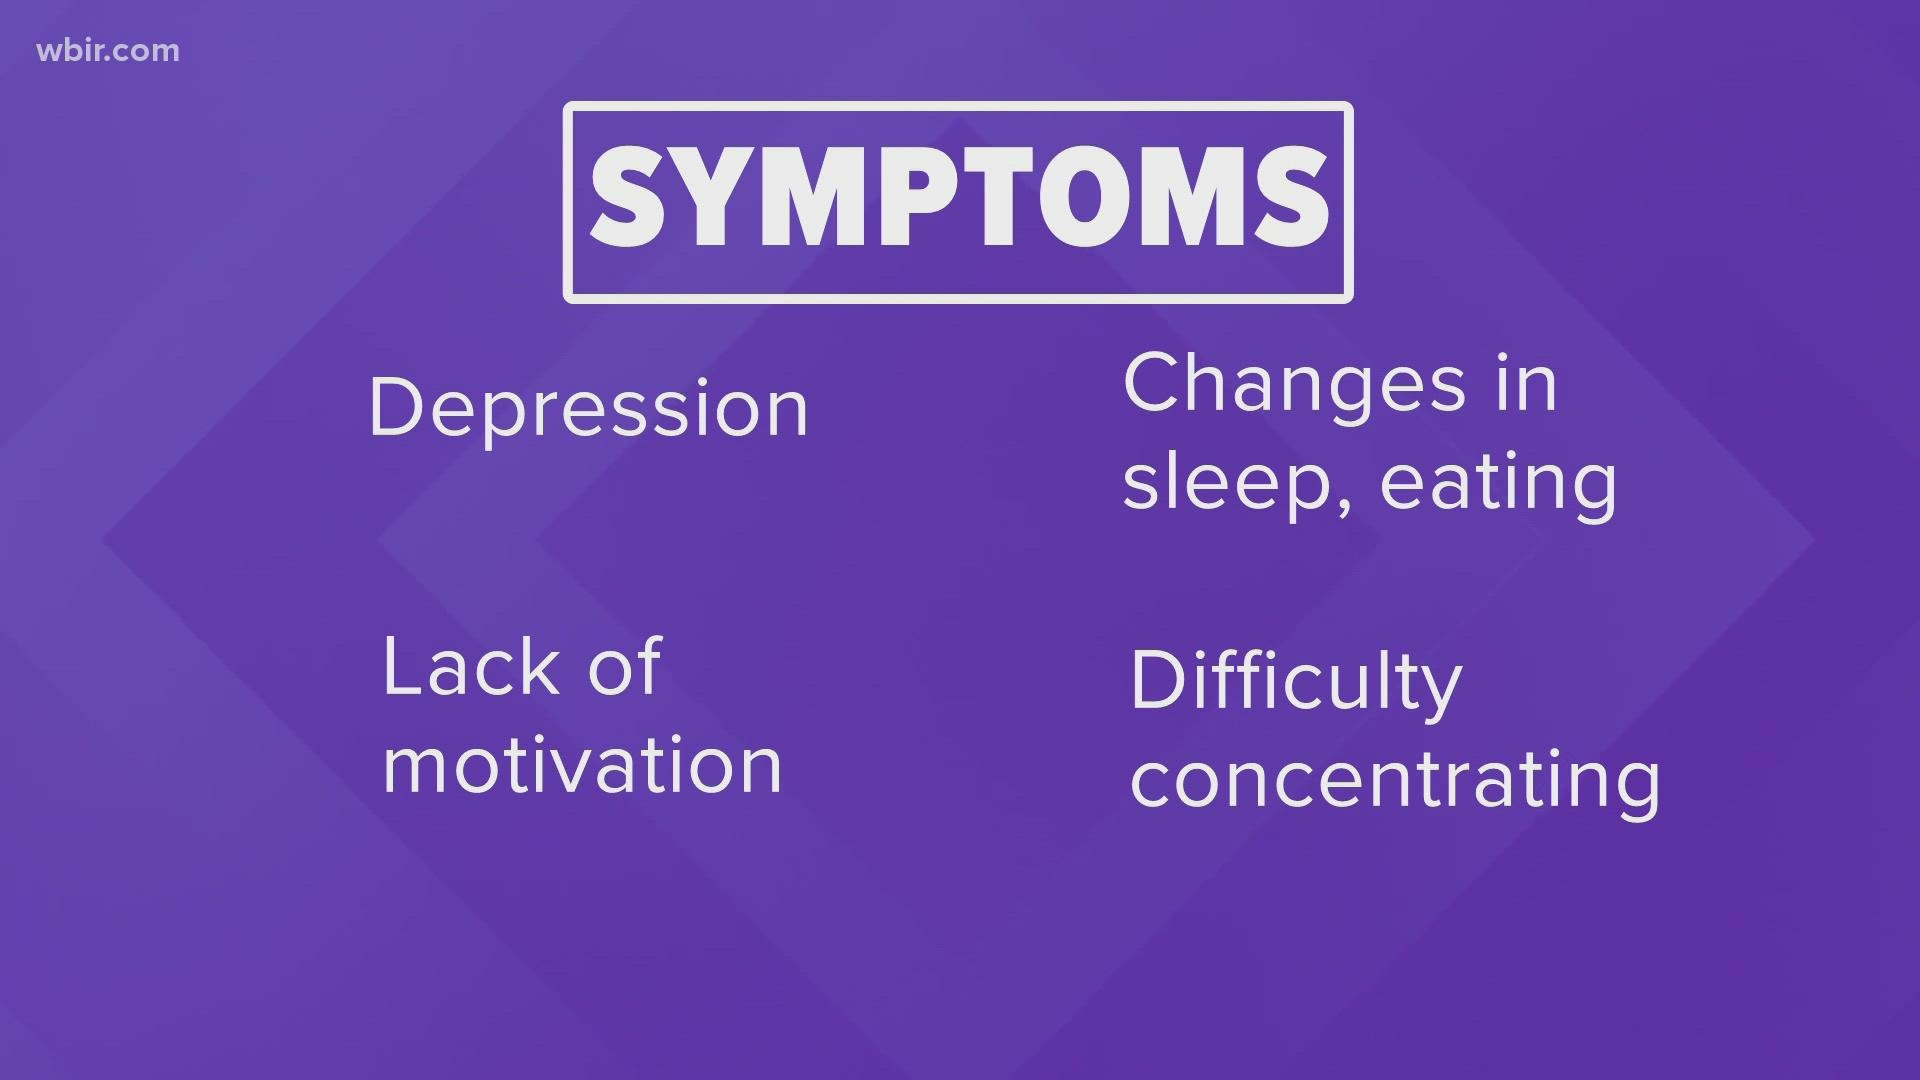 If your symptoms don't improve, talk to your doctor or a mental health expert for support.